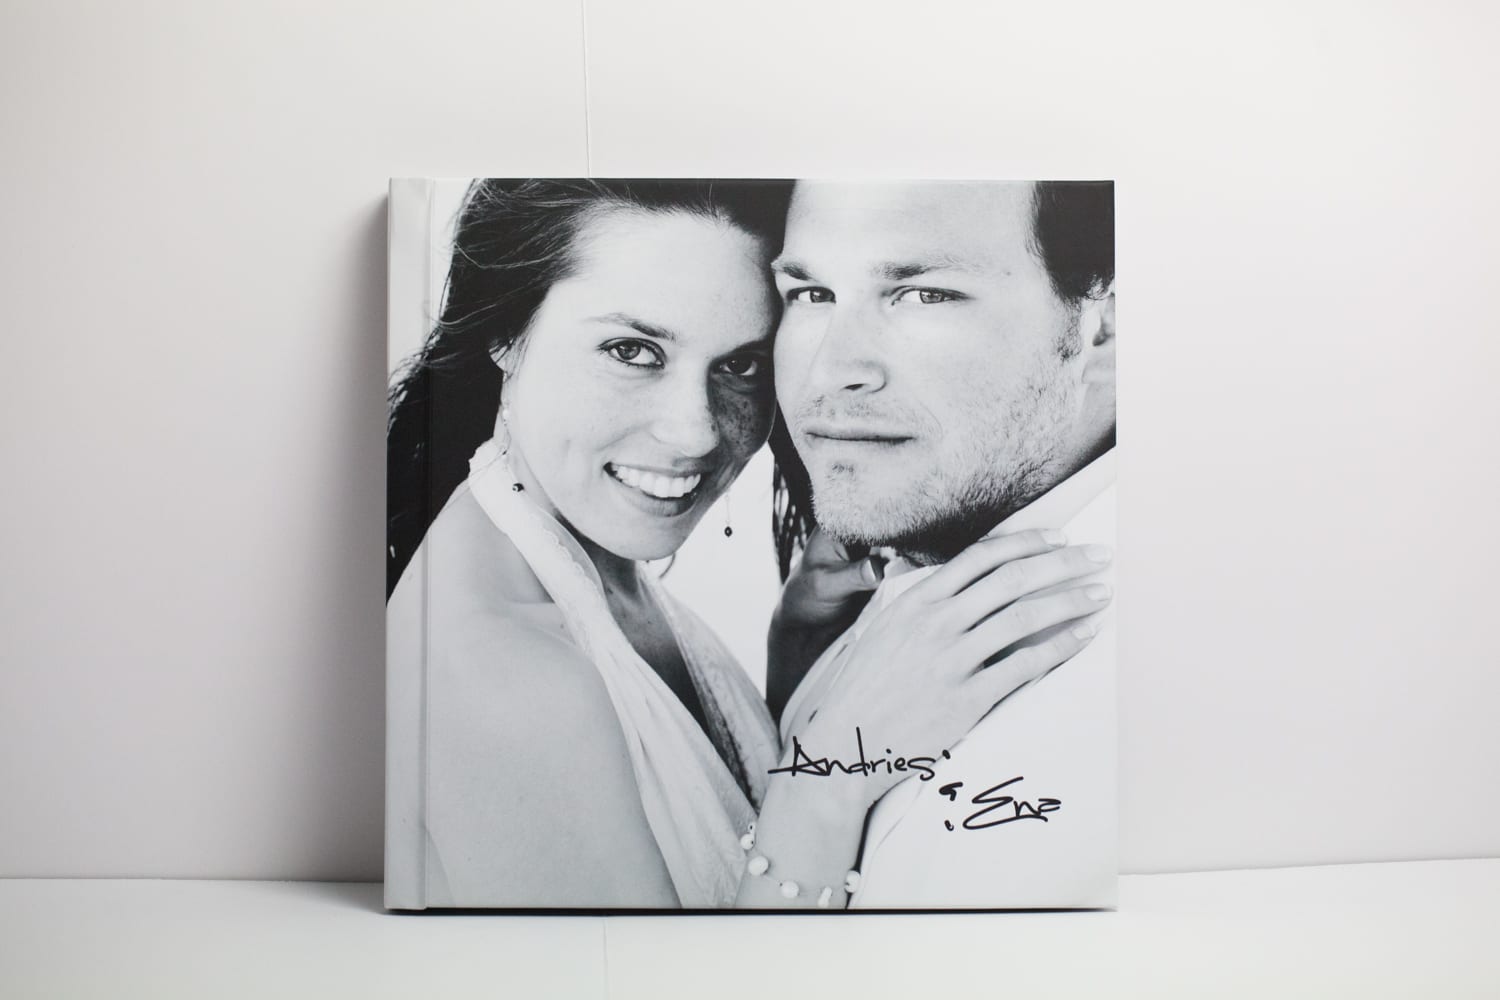 extra large 12x12 photo wrap cover at llifethreads albums